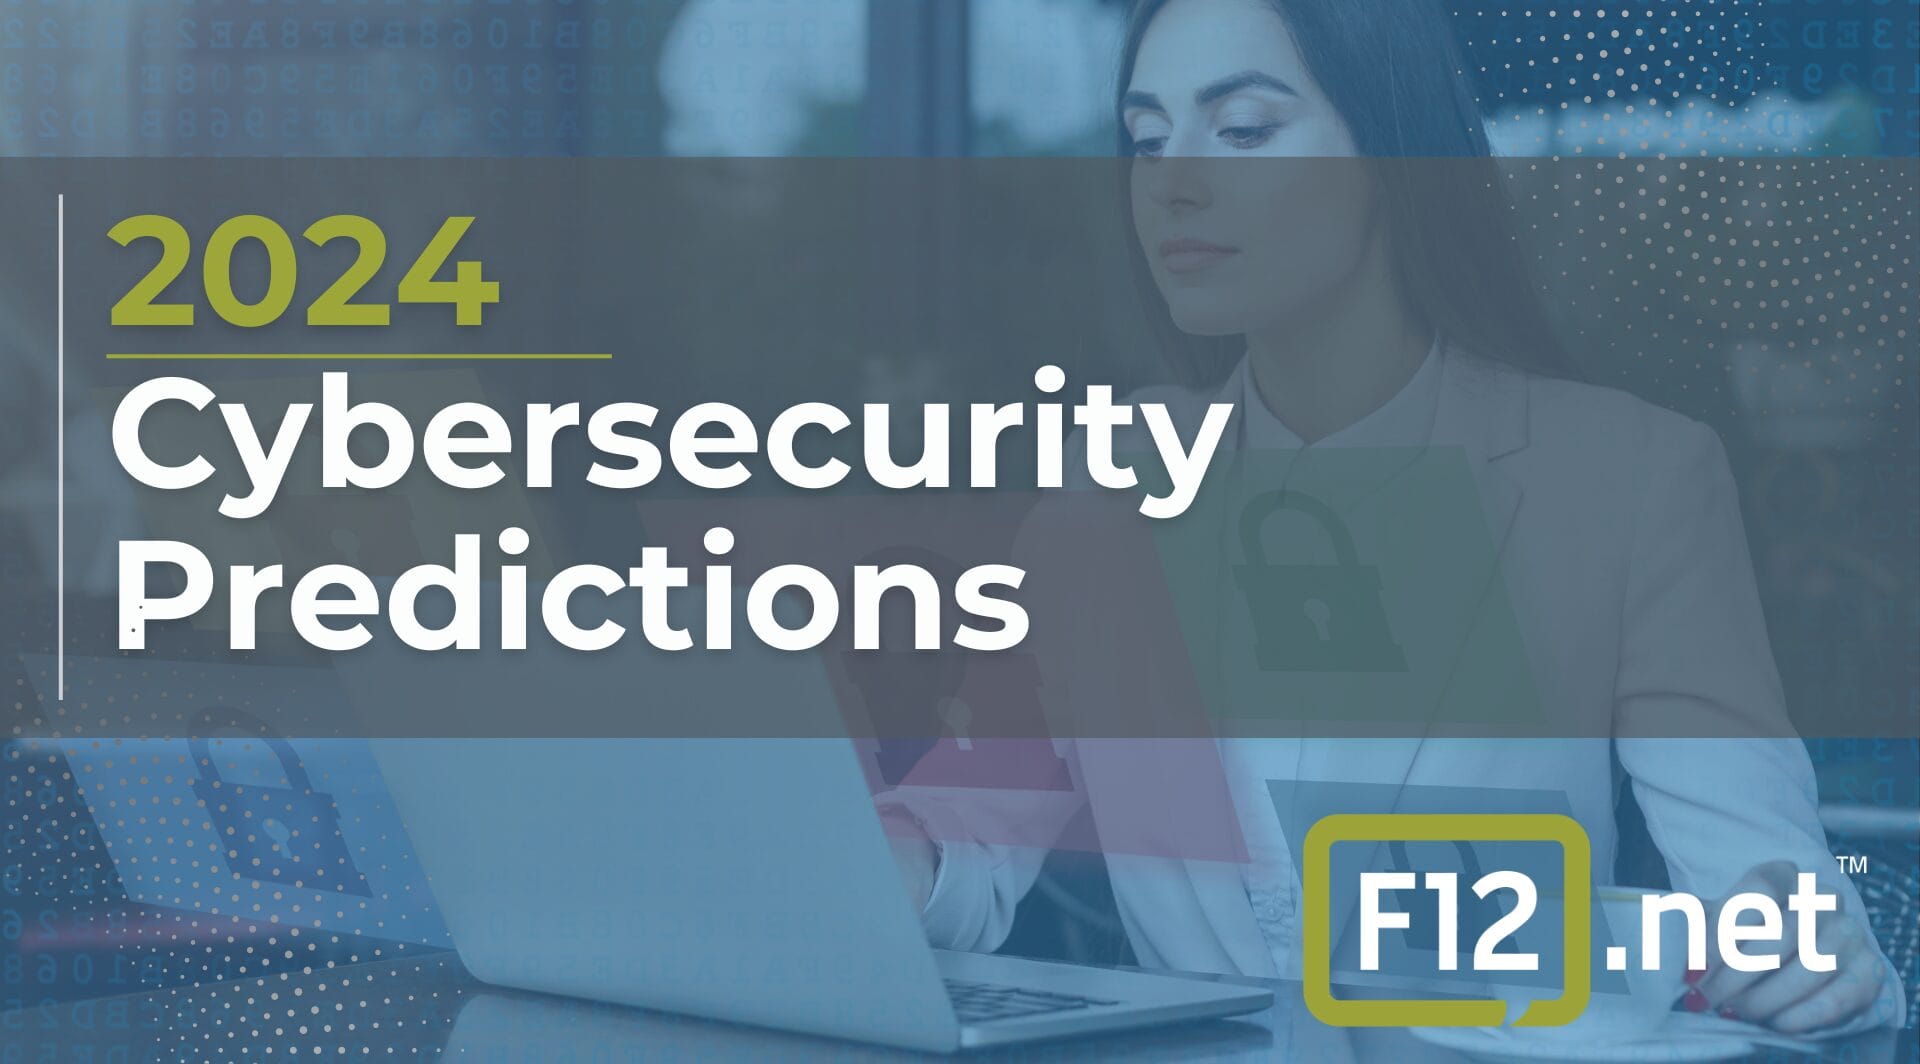 2024 Cyber security Predictions